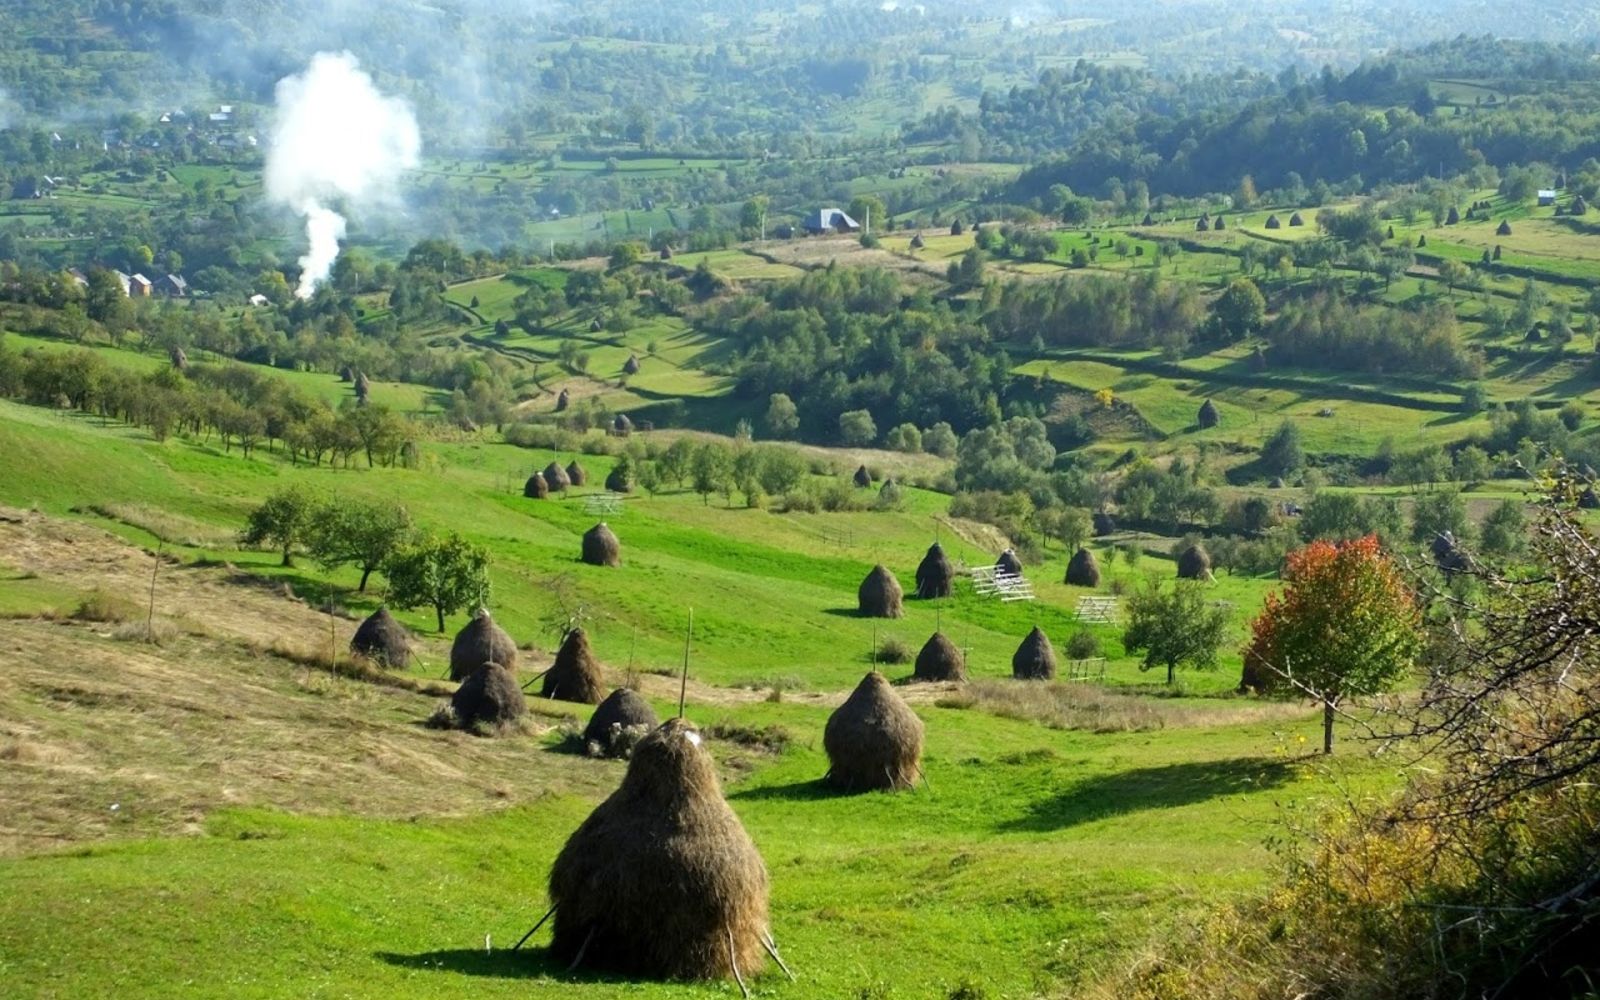 Discover Maramures by bike - Self guided cycling tour